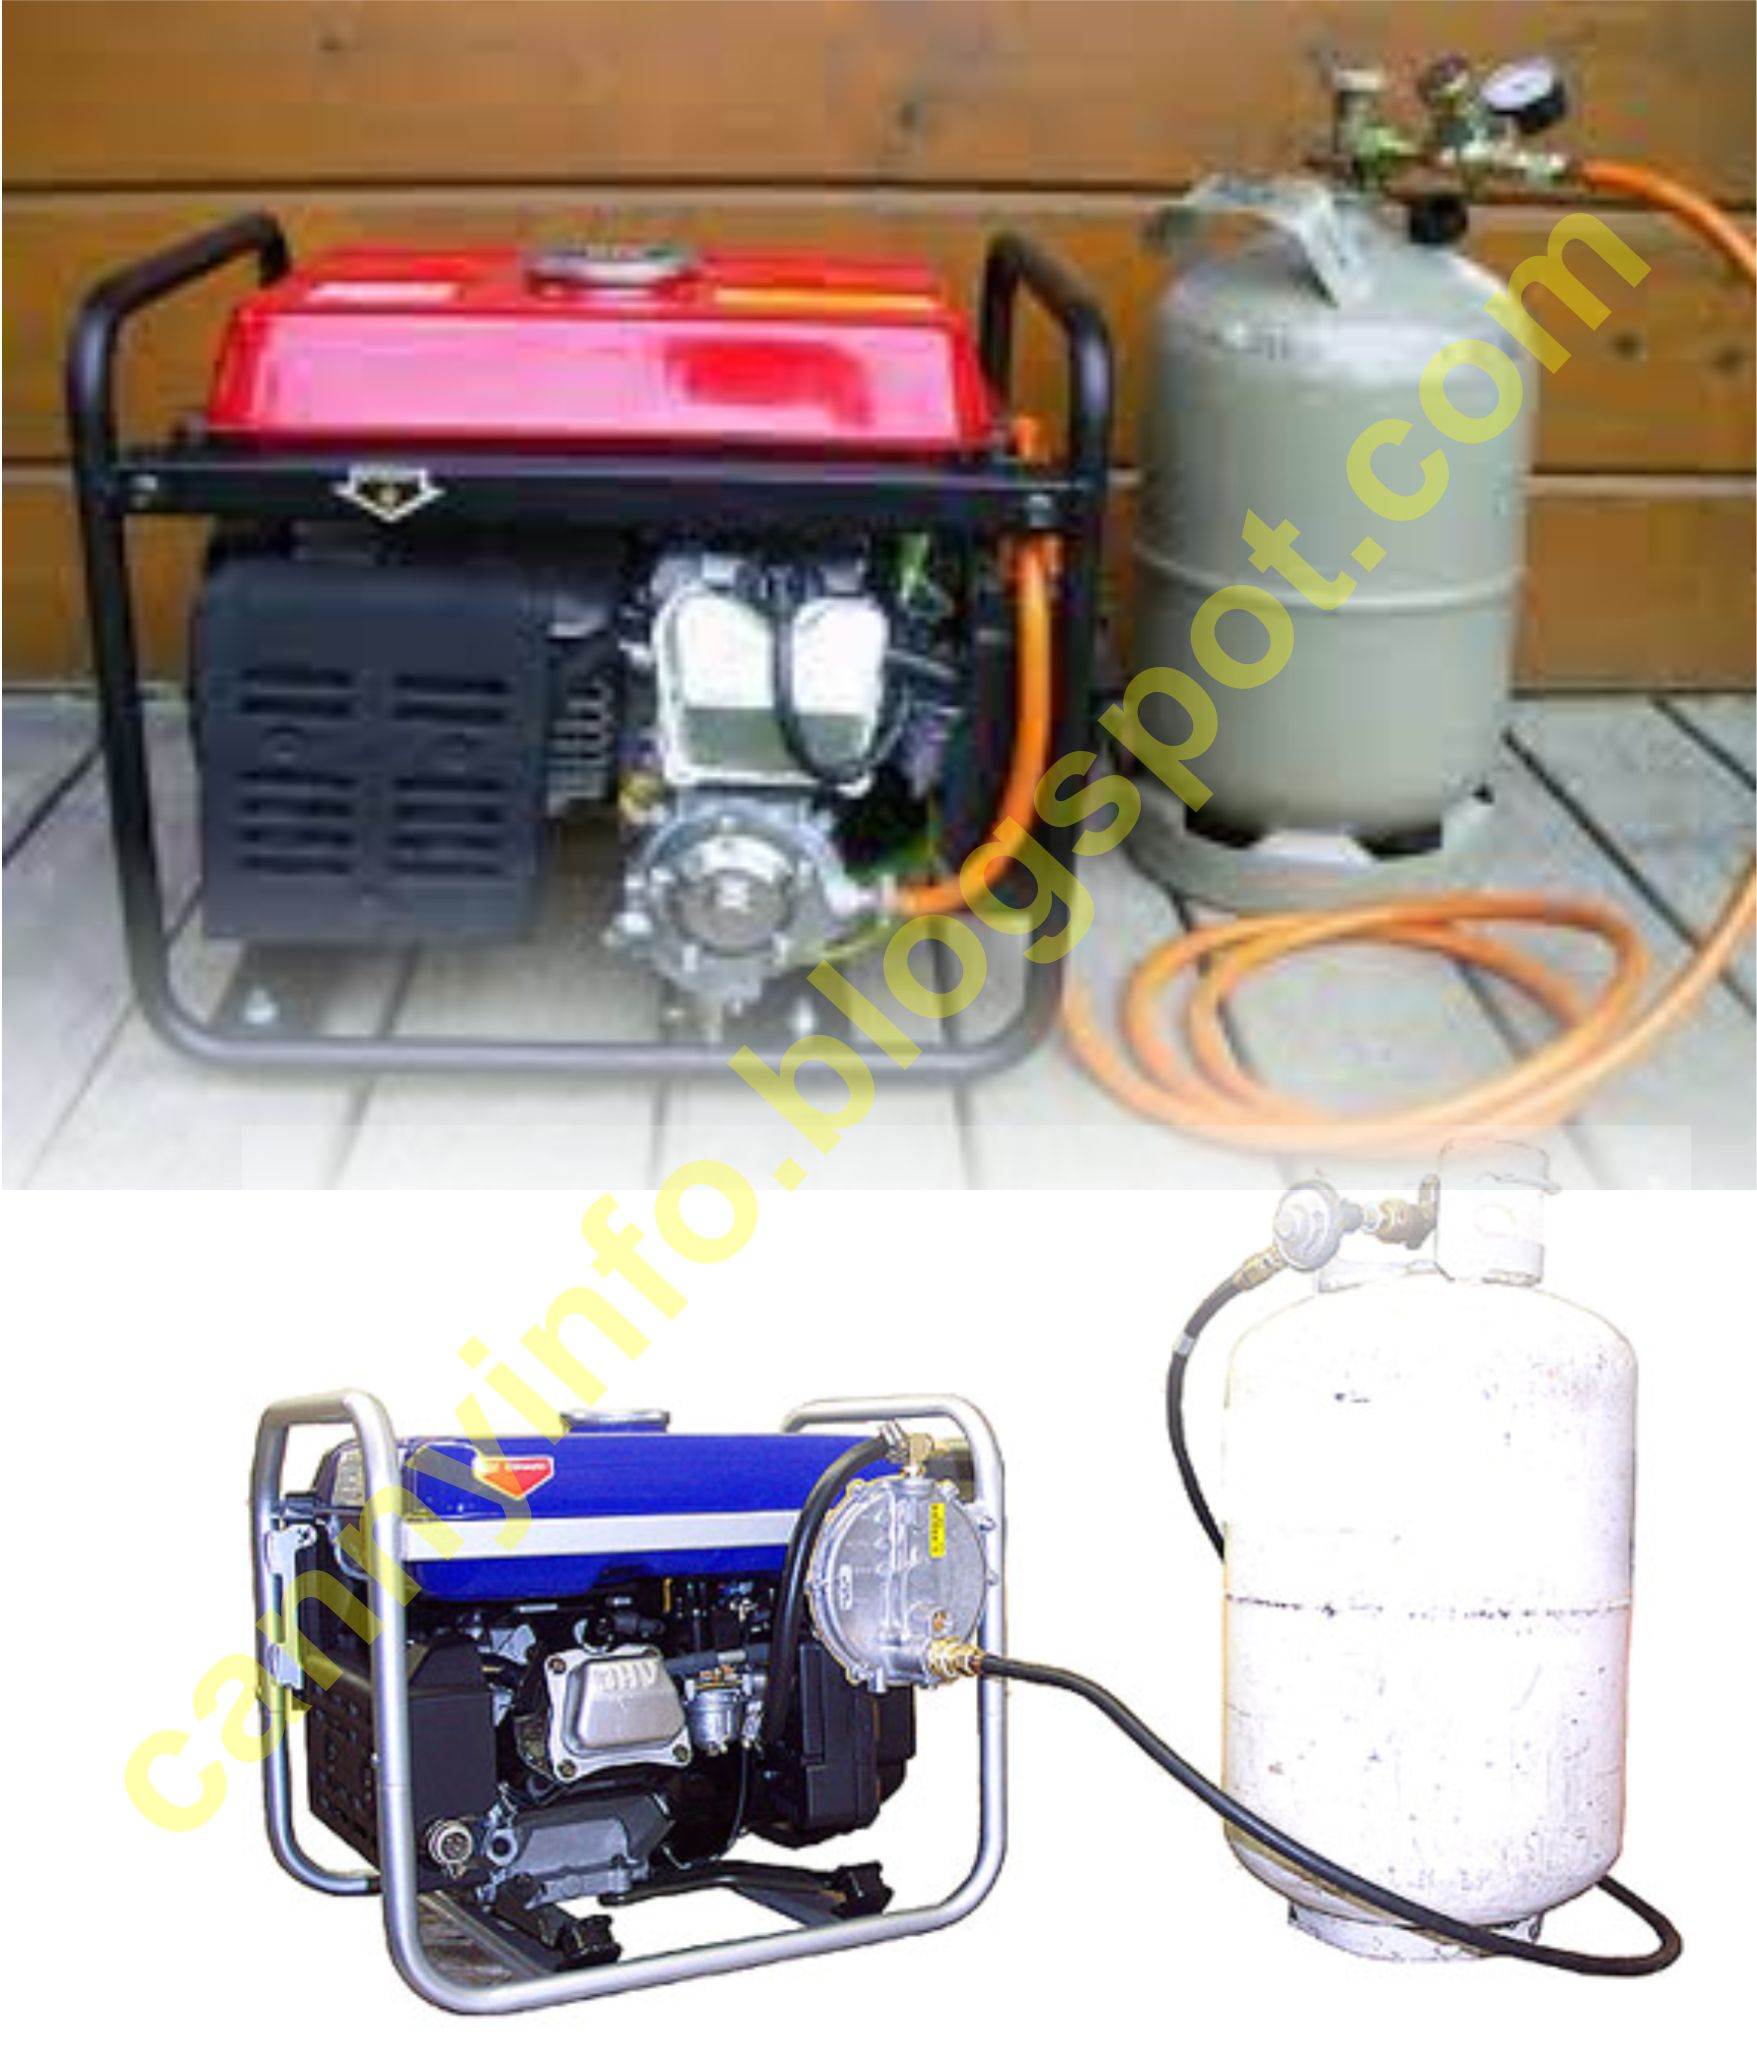 HOW TO USED GAS AND POWER YOUR GENERATOR INSTEAD OF FUEL.